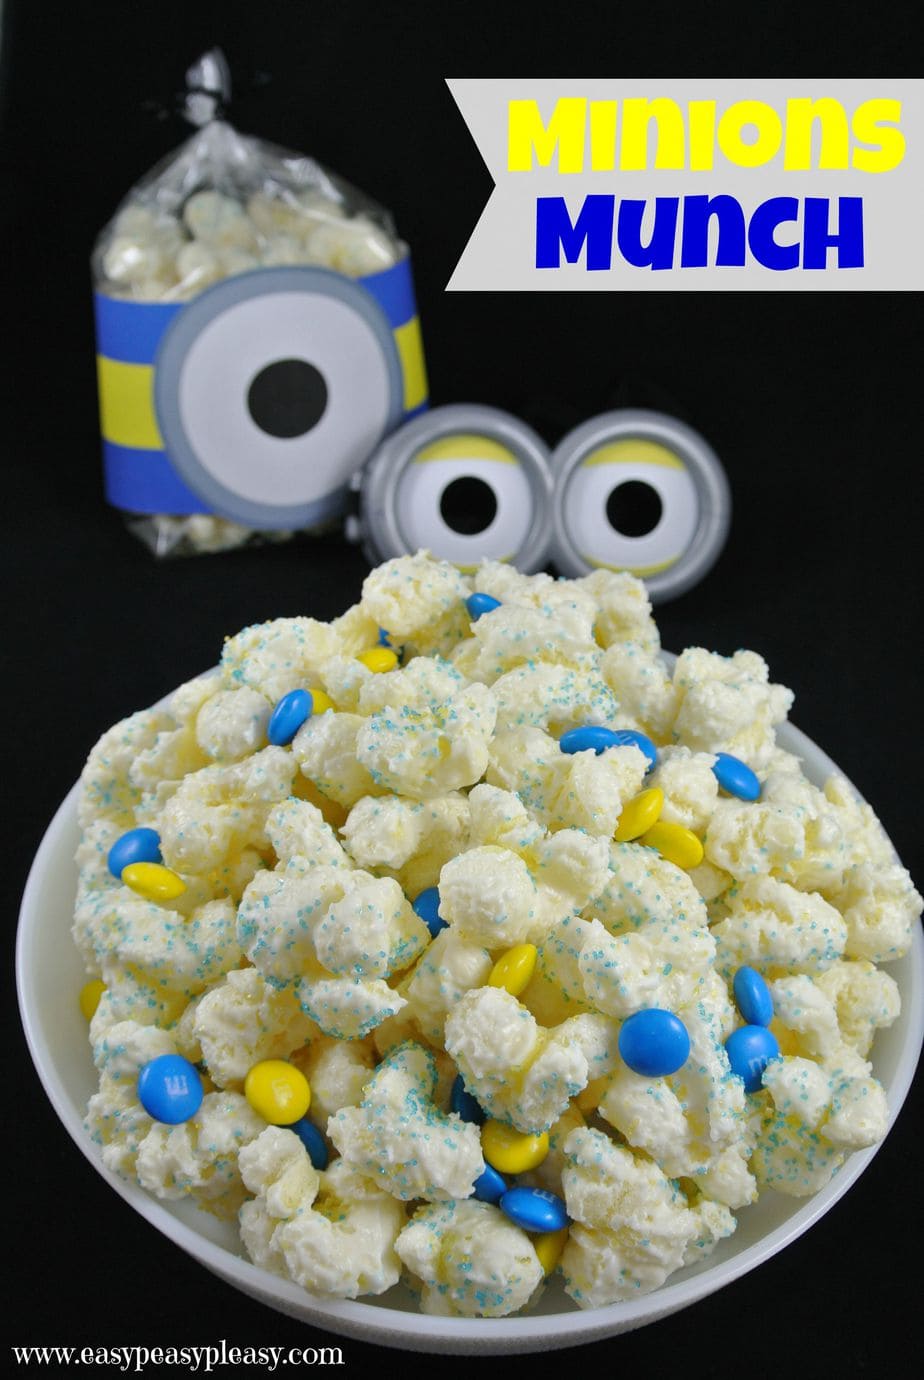 Minions Munch is an easy sweet treat that comes together in 5 minutes! Almond Bark and Puffcorn combine to make the perfect party snack for your next movie viewing, sleepover, or just hanging out with your kiddos!